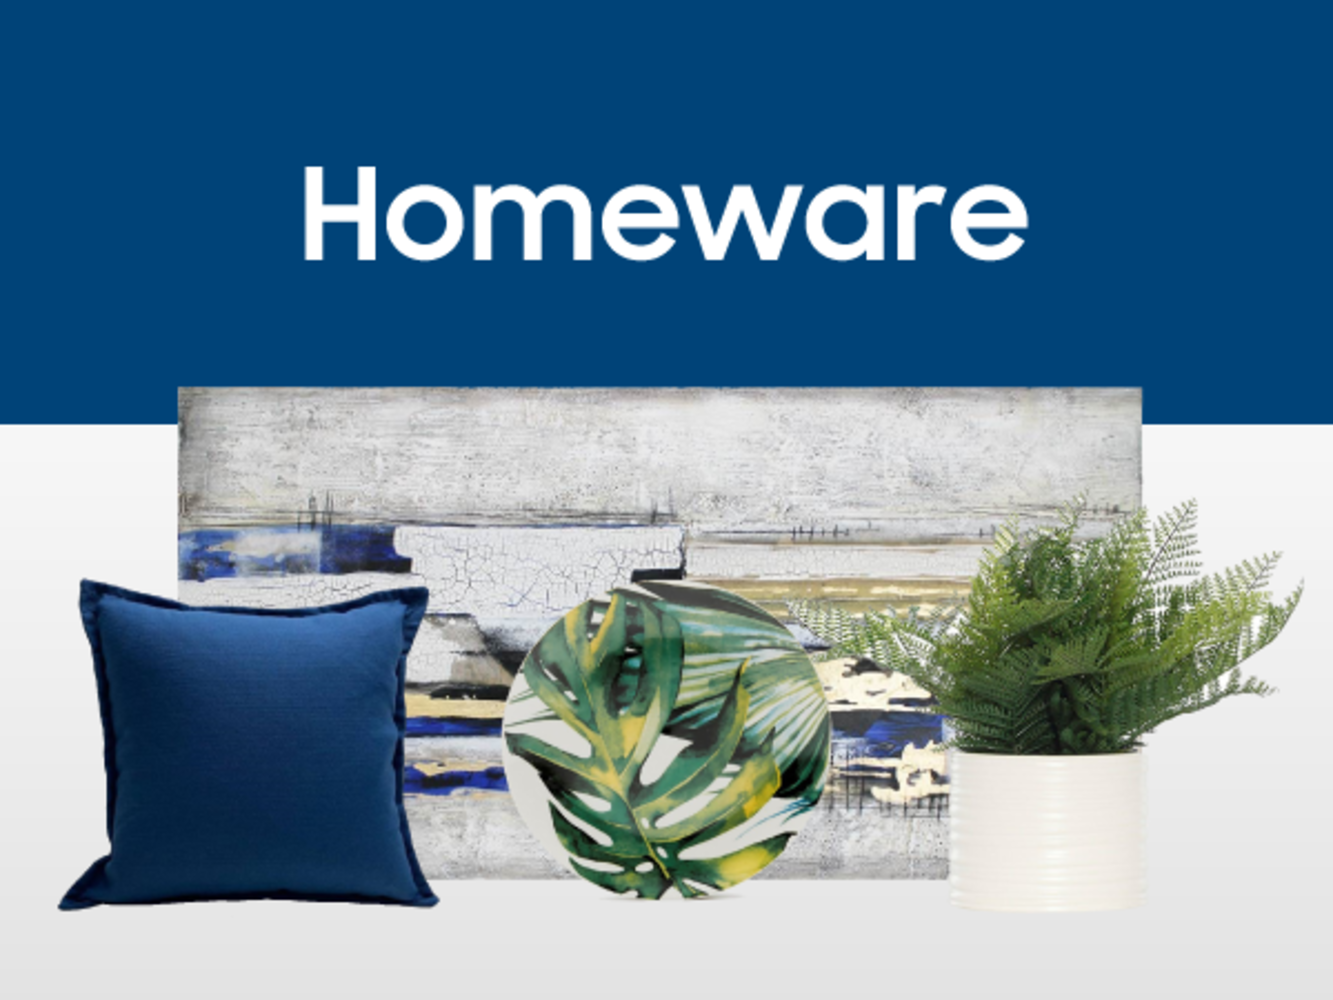 Huge Home and Kitchen wares sale with The White Company, Alice Peto, Joseph Joseph, Vera Wang, Wedgewood, Global and more